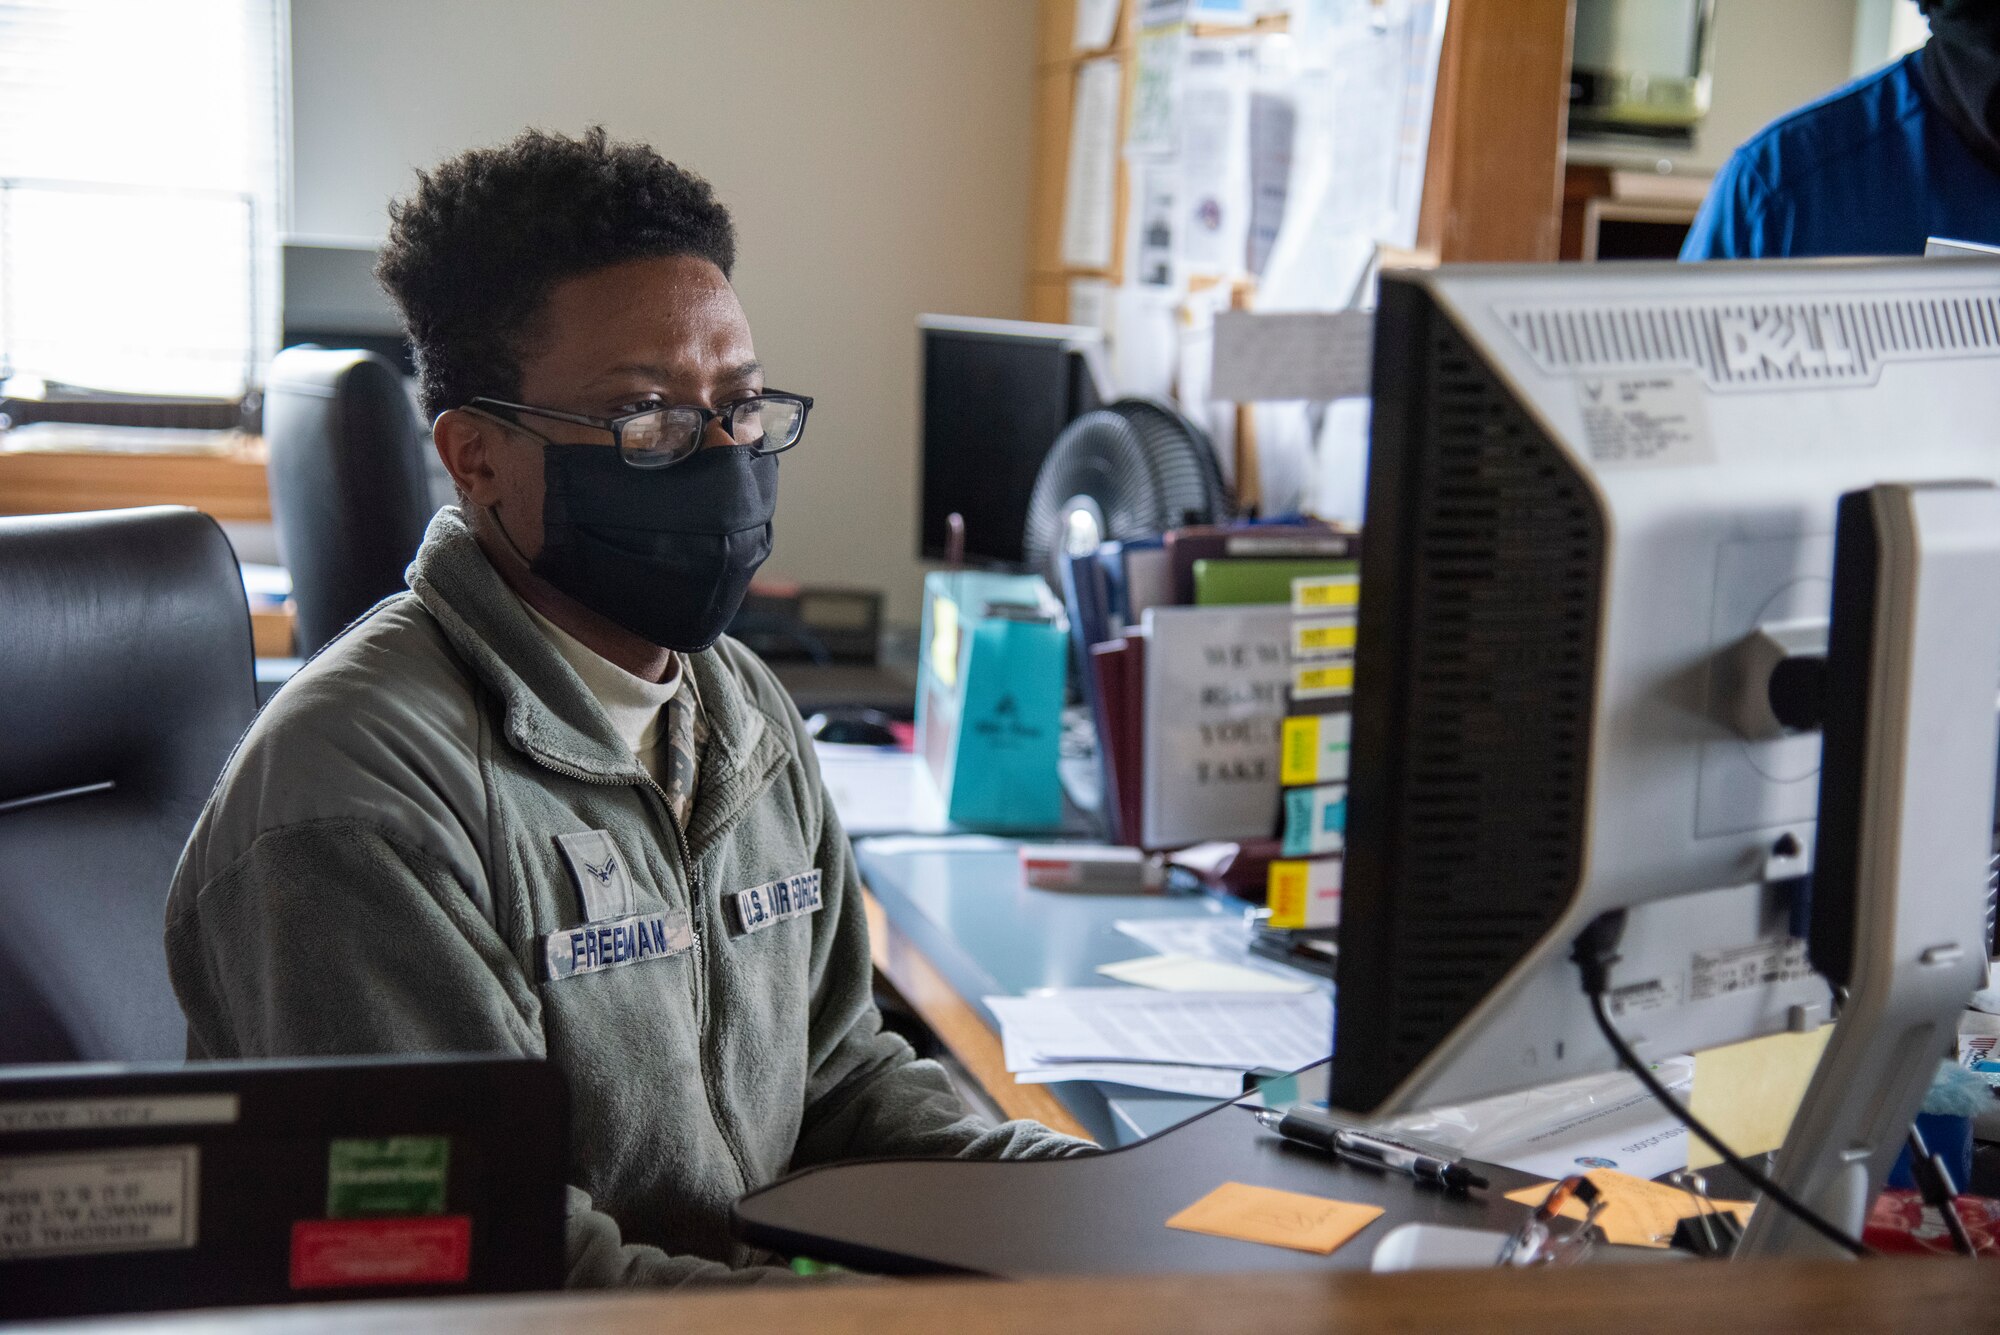 Airman 1st Class Malik Freeman, 436th Airlift Wing Legal Office paralegal, reviews information on a computer May 1, 2020, at Dover Air Force Base, Delaware. Freeman wears a mask in accordance with the Department of Defense instruction to reduce the spread of COVID-19. (U.S. Air Force photo by Airman 1st Class Jonathan Harding)